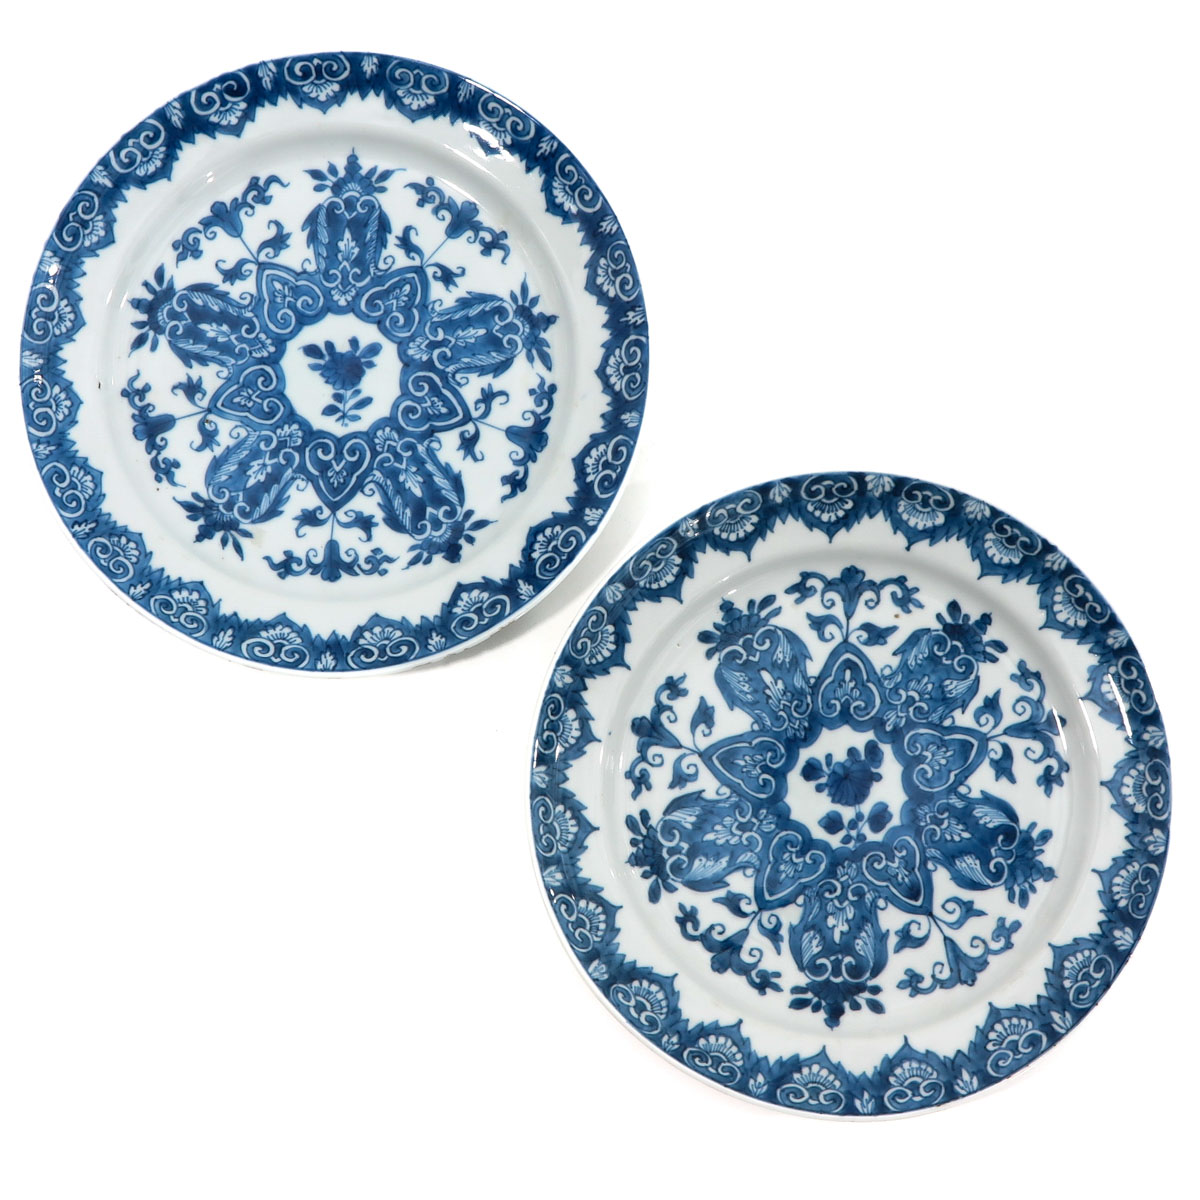 A Series of 5 Blue and White Plates - Image 3 of 10